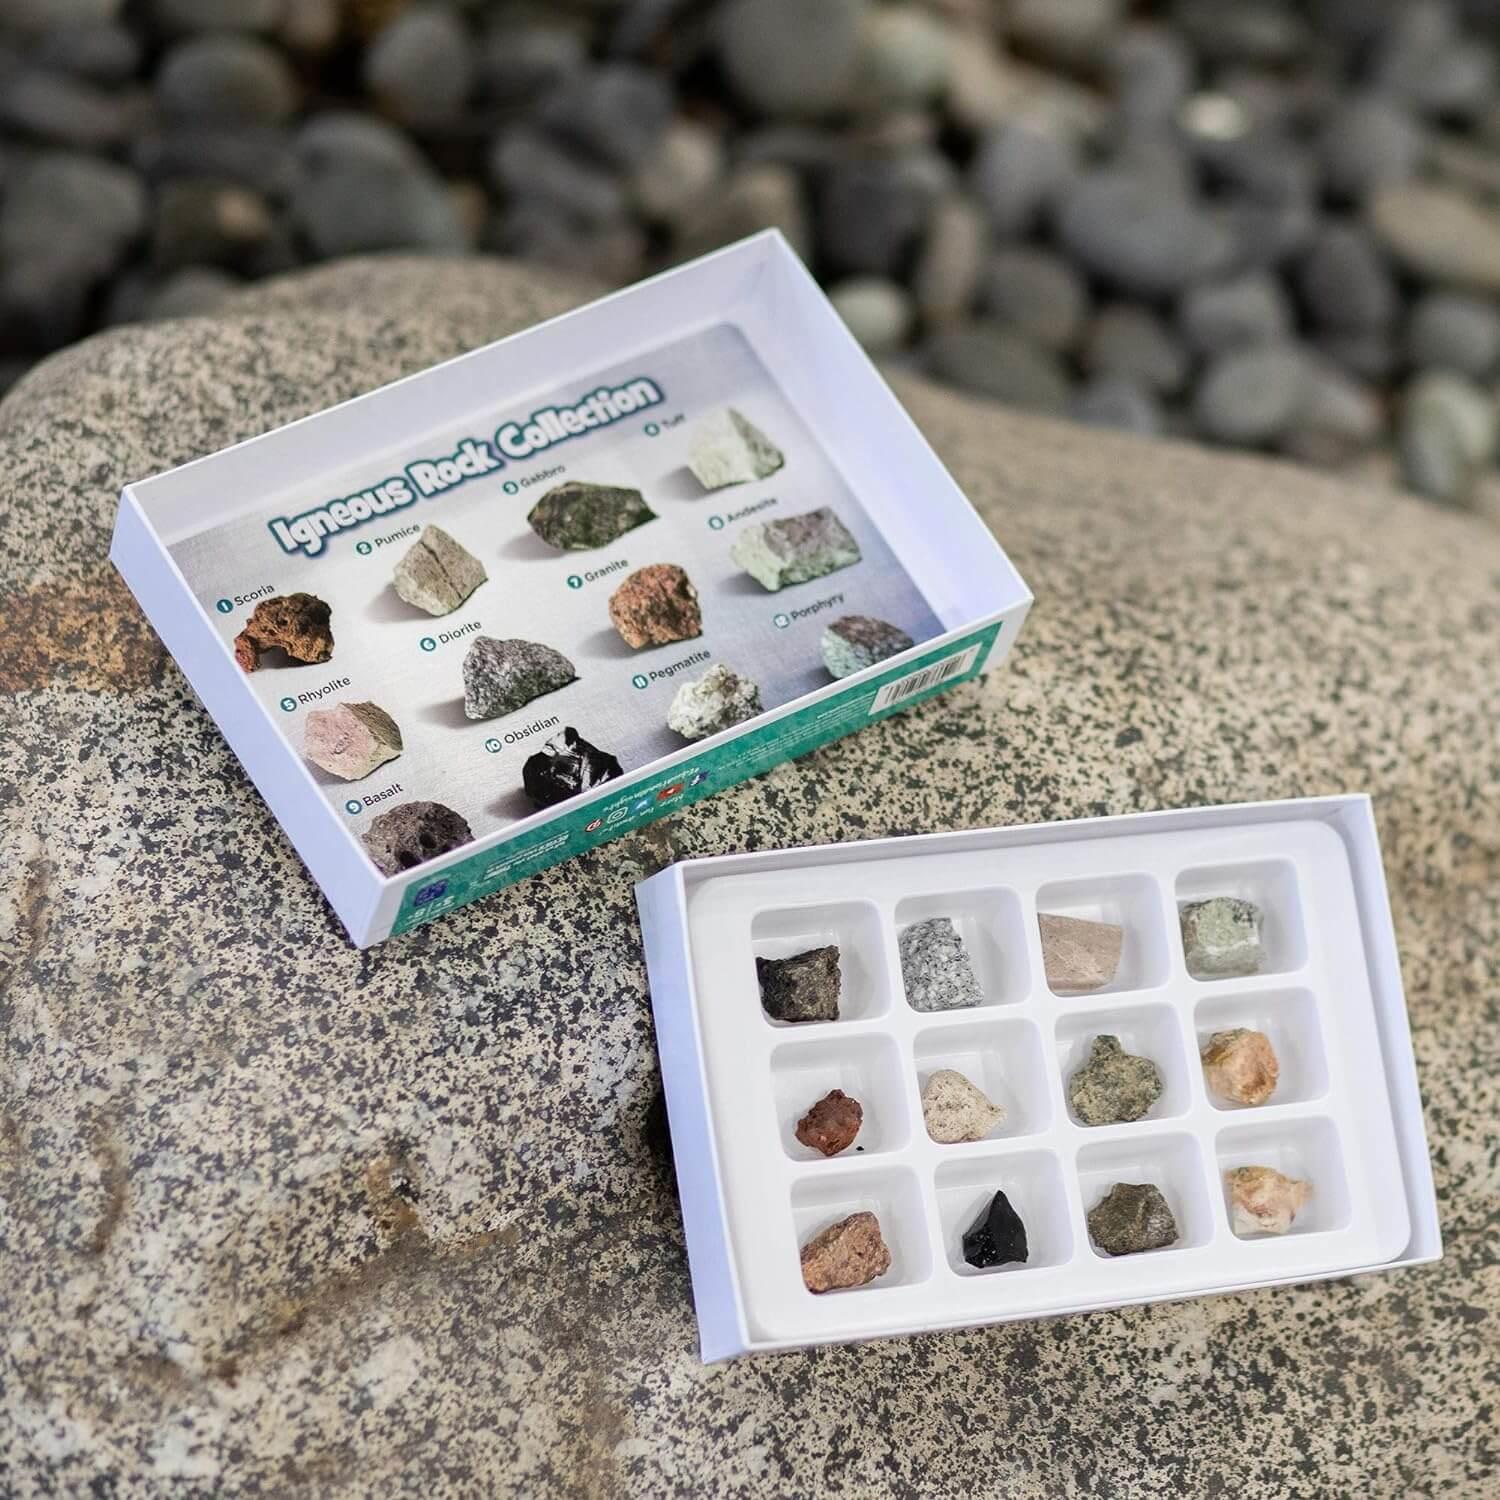 Learning Resources Educational Insights Igneous Rock Collection